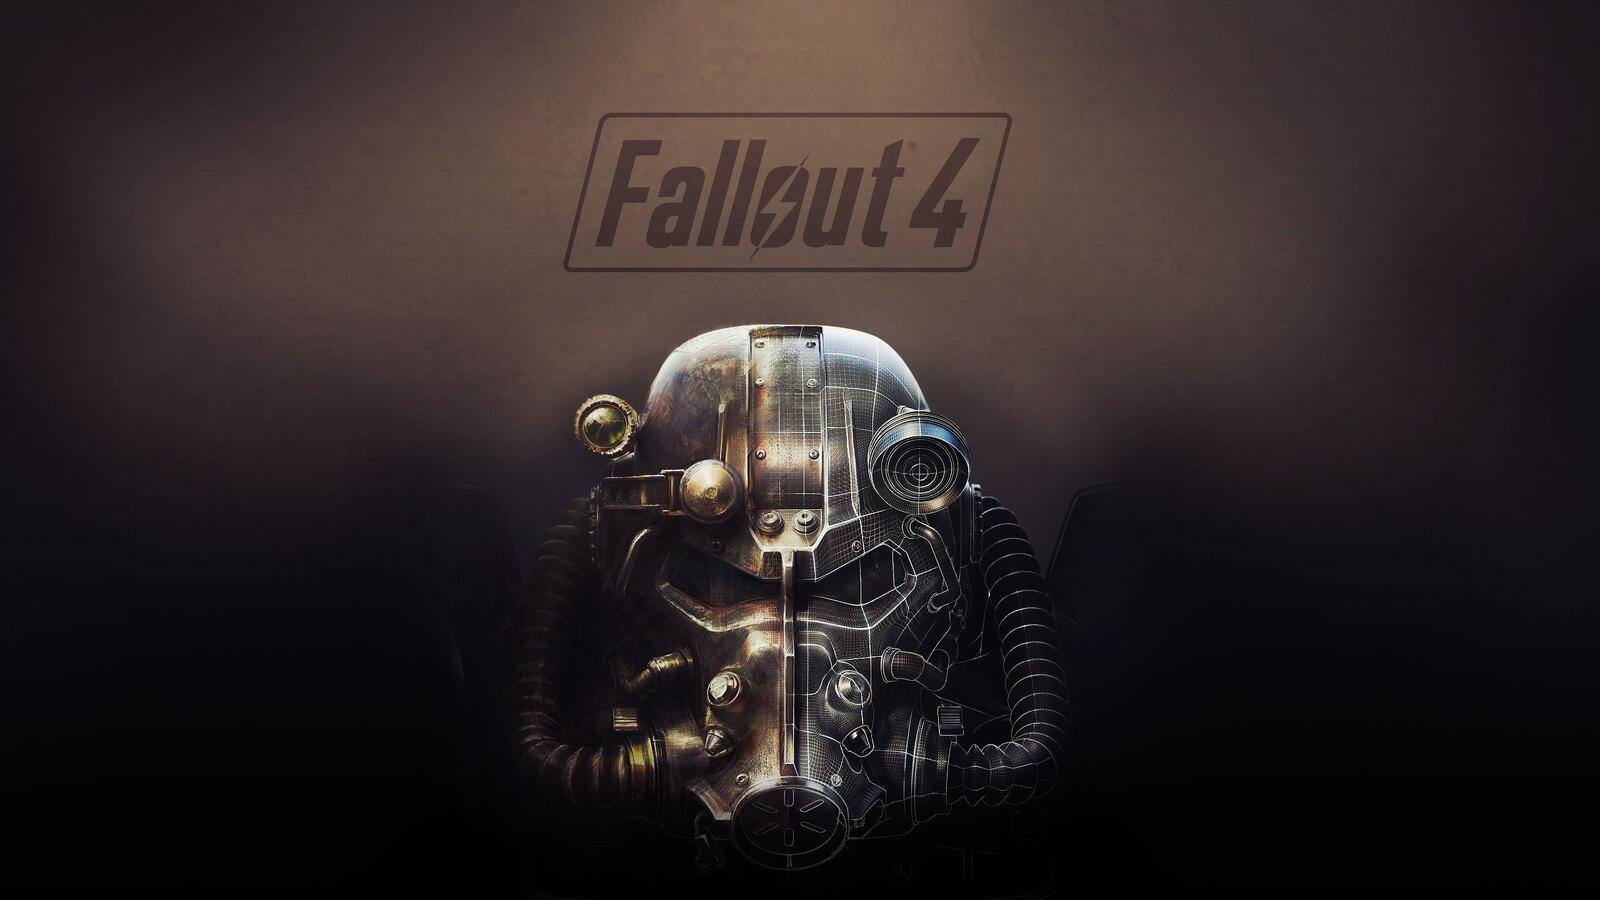 Wallpapers metal Fallout fallout 4 on the desktop